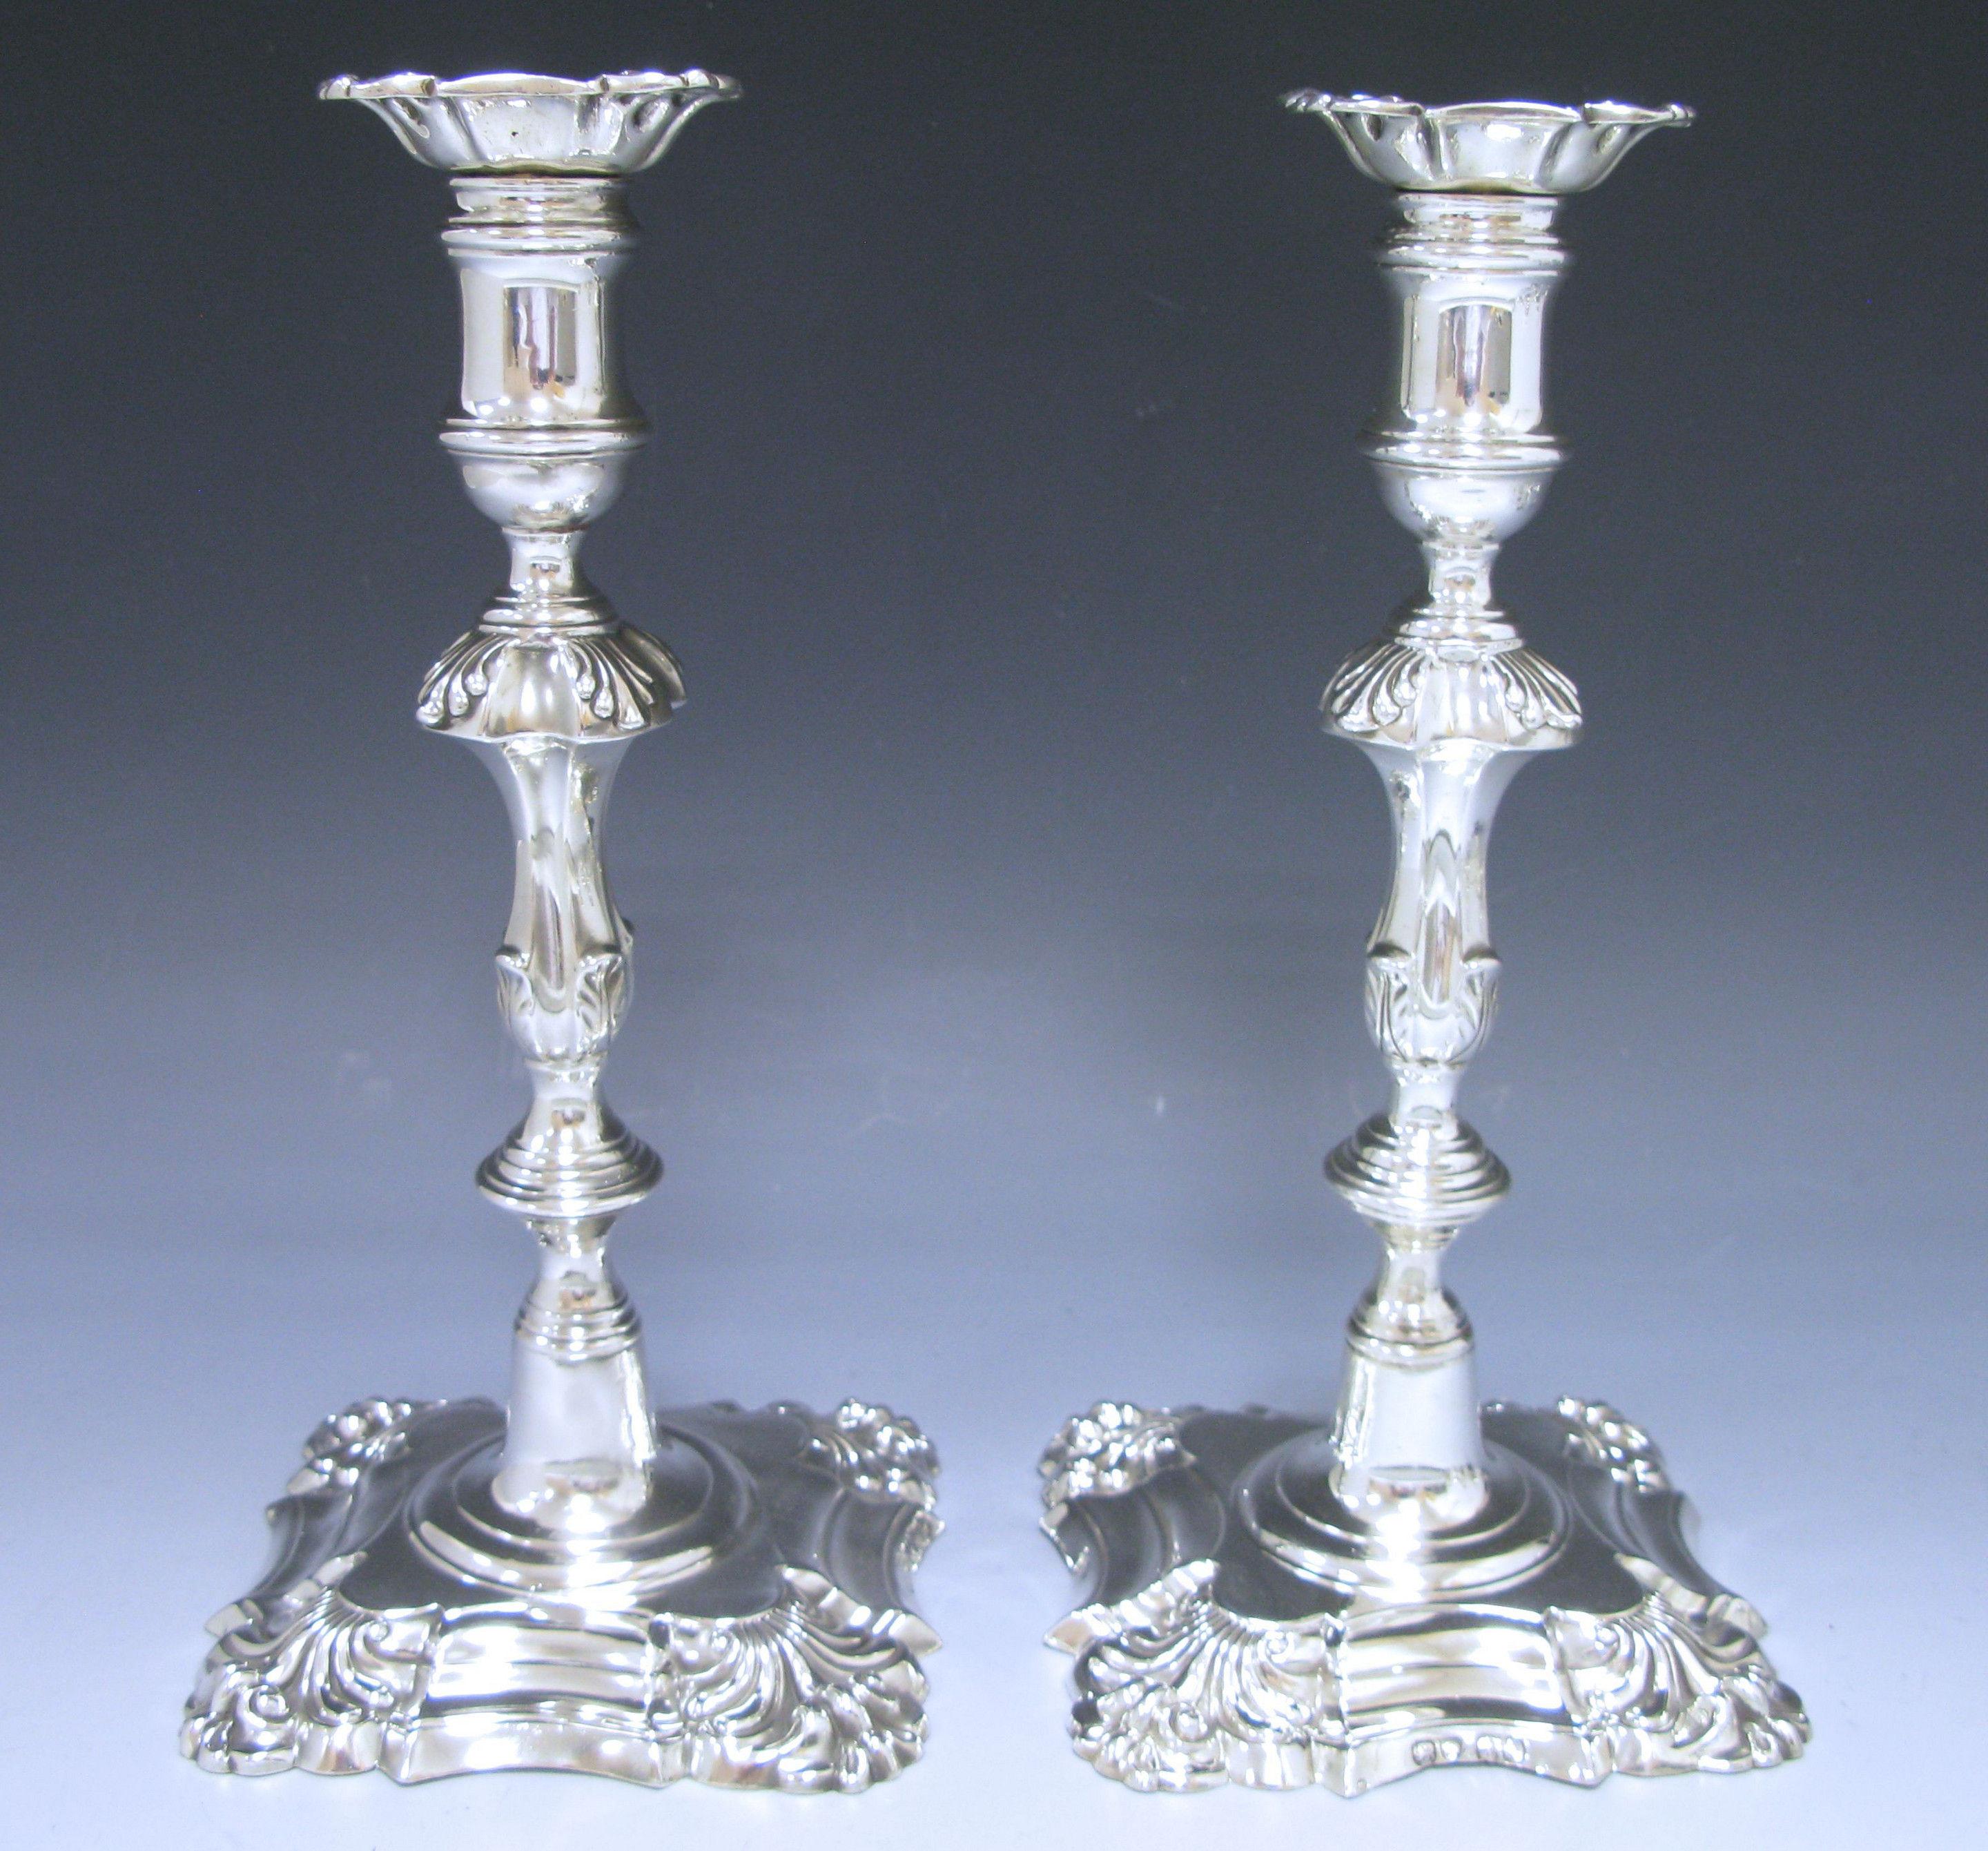 George IV Pair of George iv Antique Silver Three-Light Candelabra For Sale